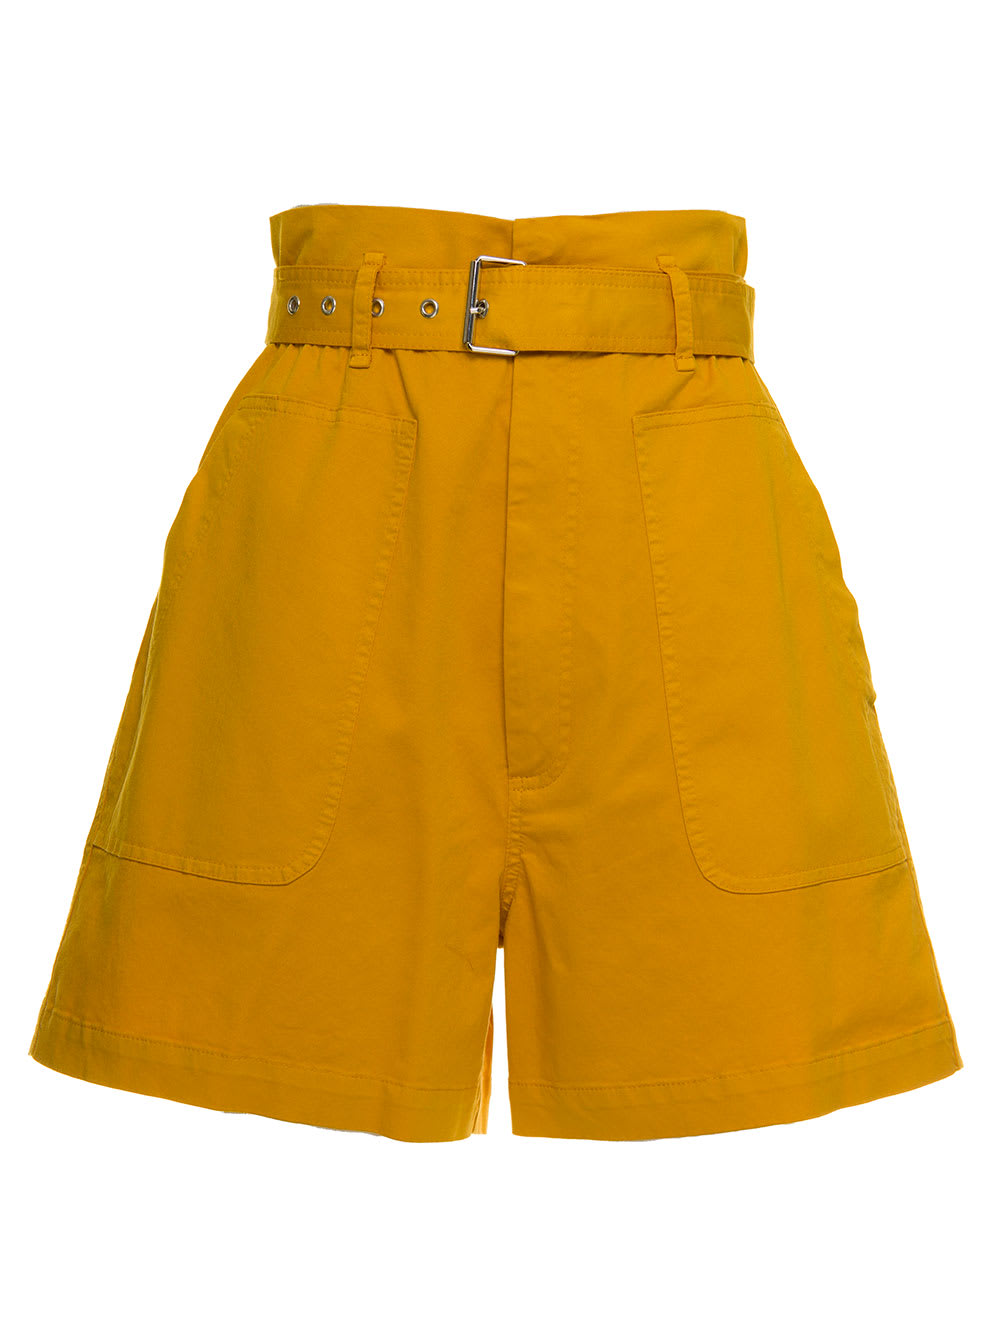 Mauro Grifoni Grifoni Womans High Waisted Cotton Mustard Colored Shorts